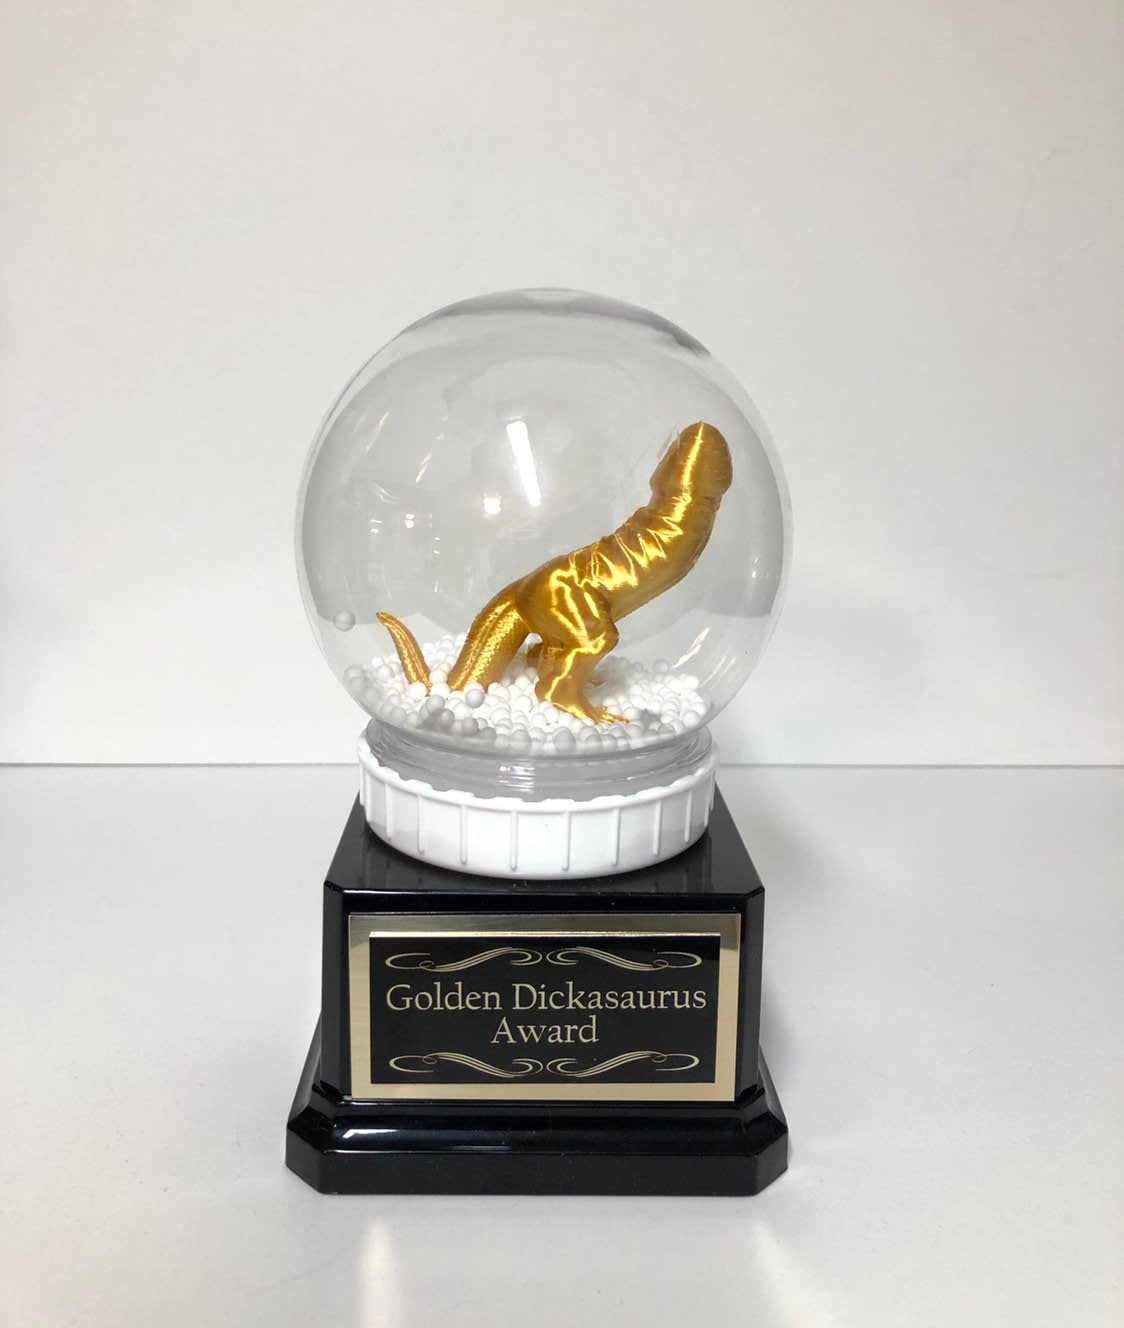 Dickasaurus Funny Trophy Snow Globe Adult Humor Award You're A Dick Christmas Gag Gift LOSER Trophy FFL Last Place Fantasy Penis Funny